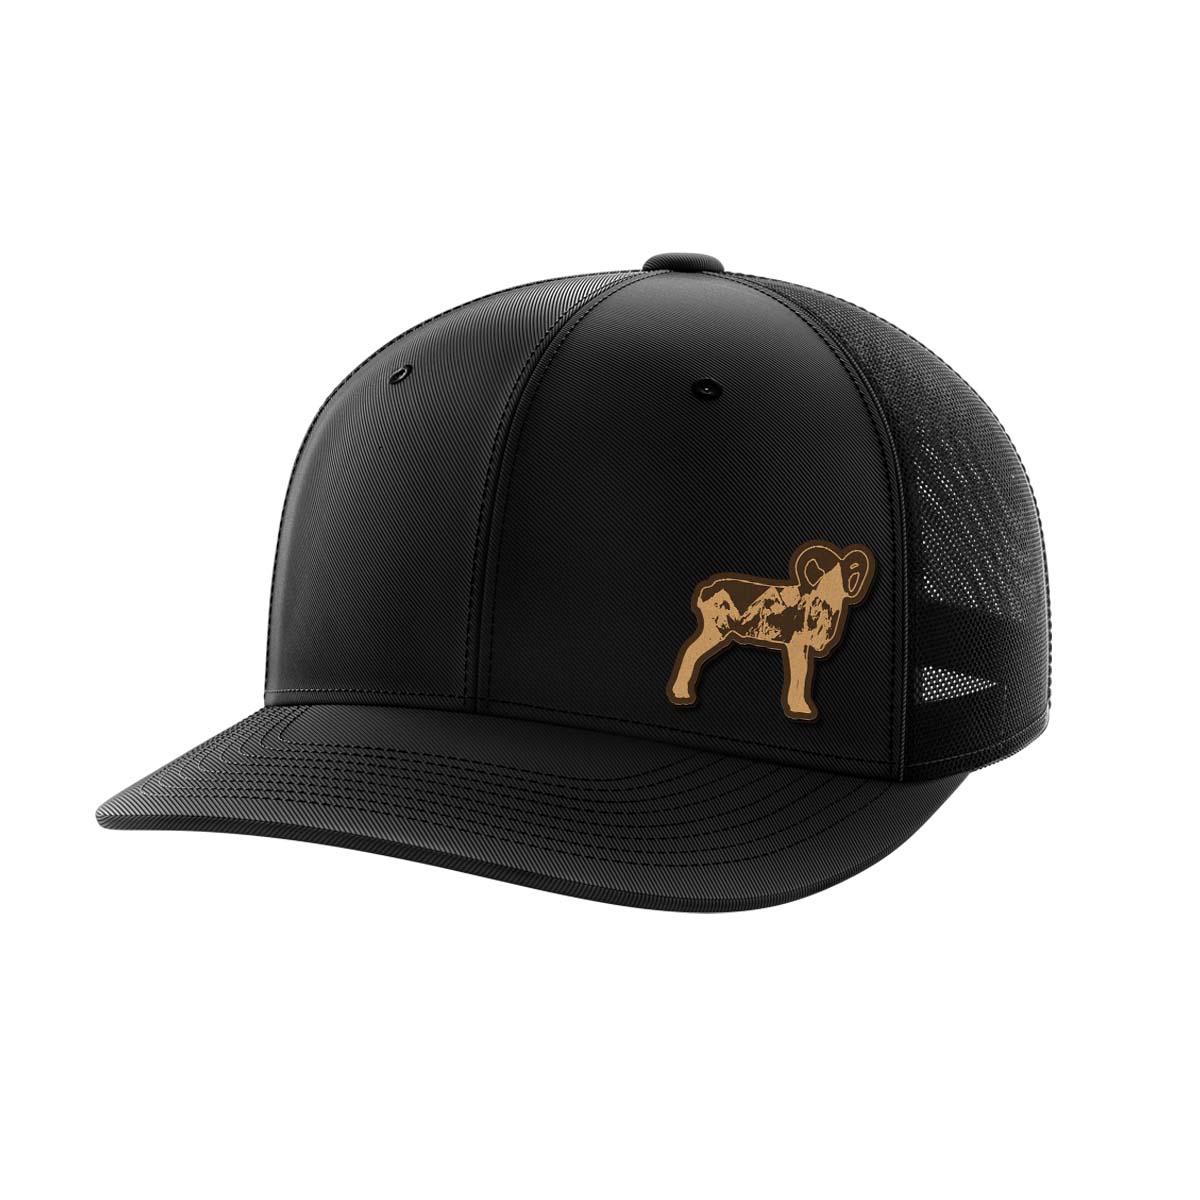 Ram Leather Patch Hat - Greater Half